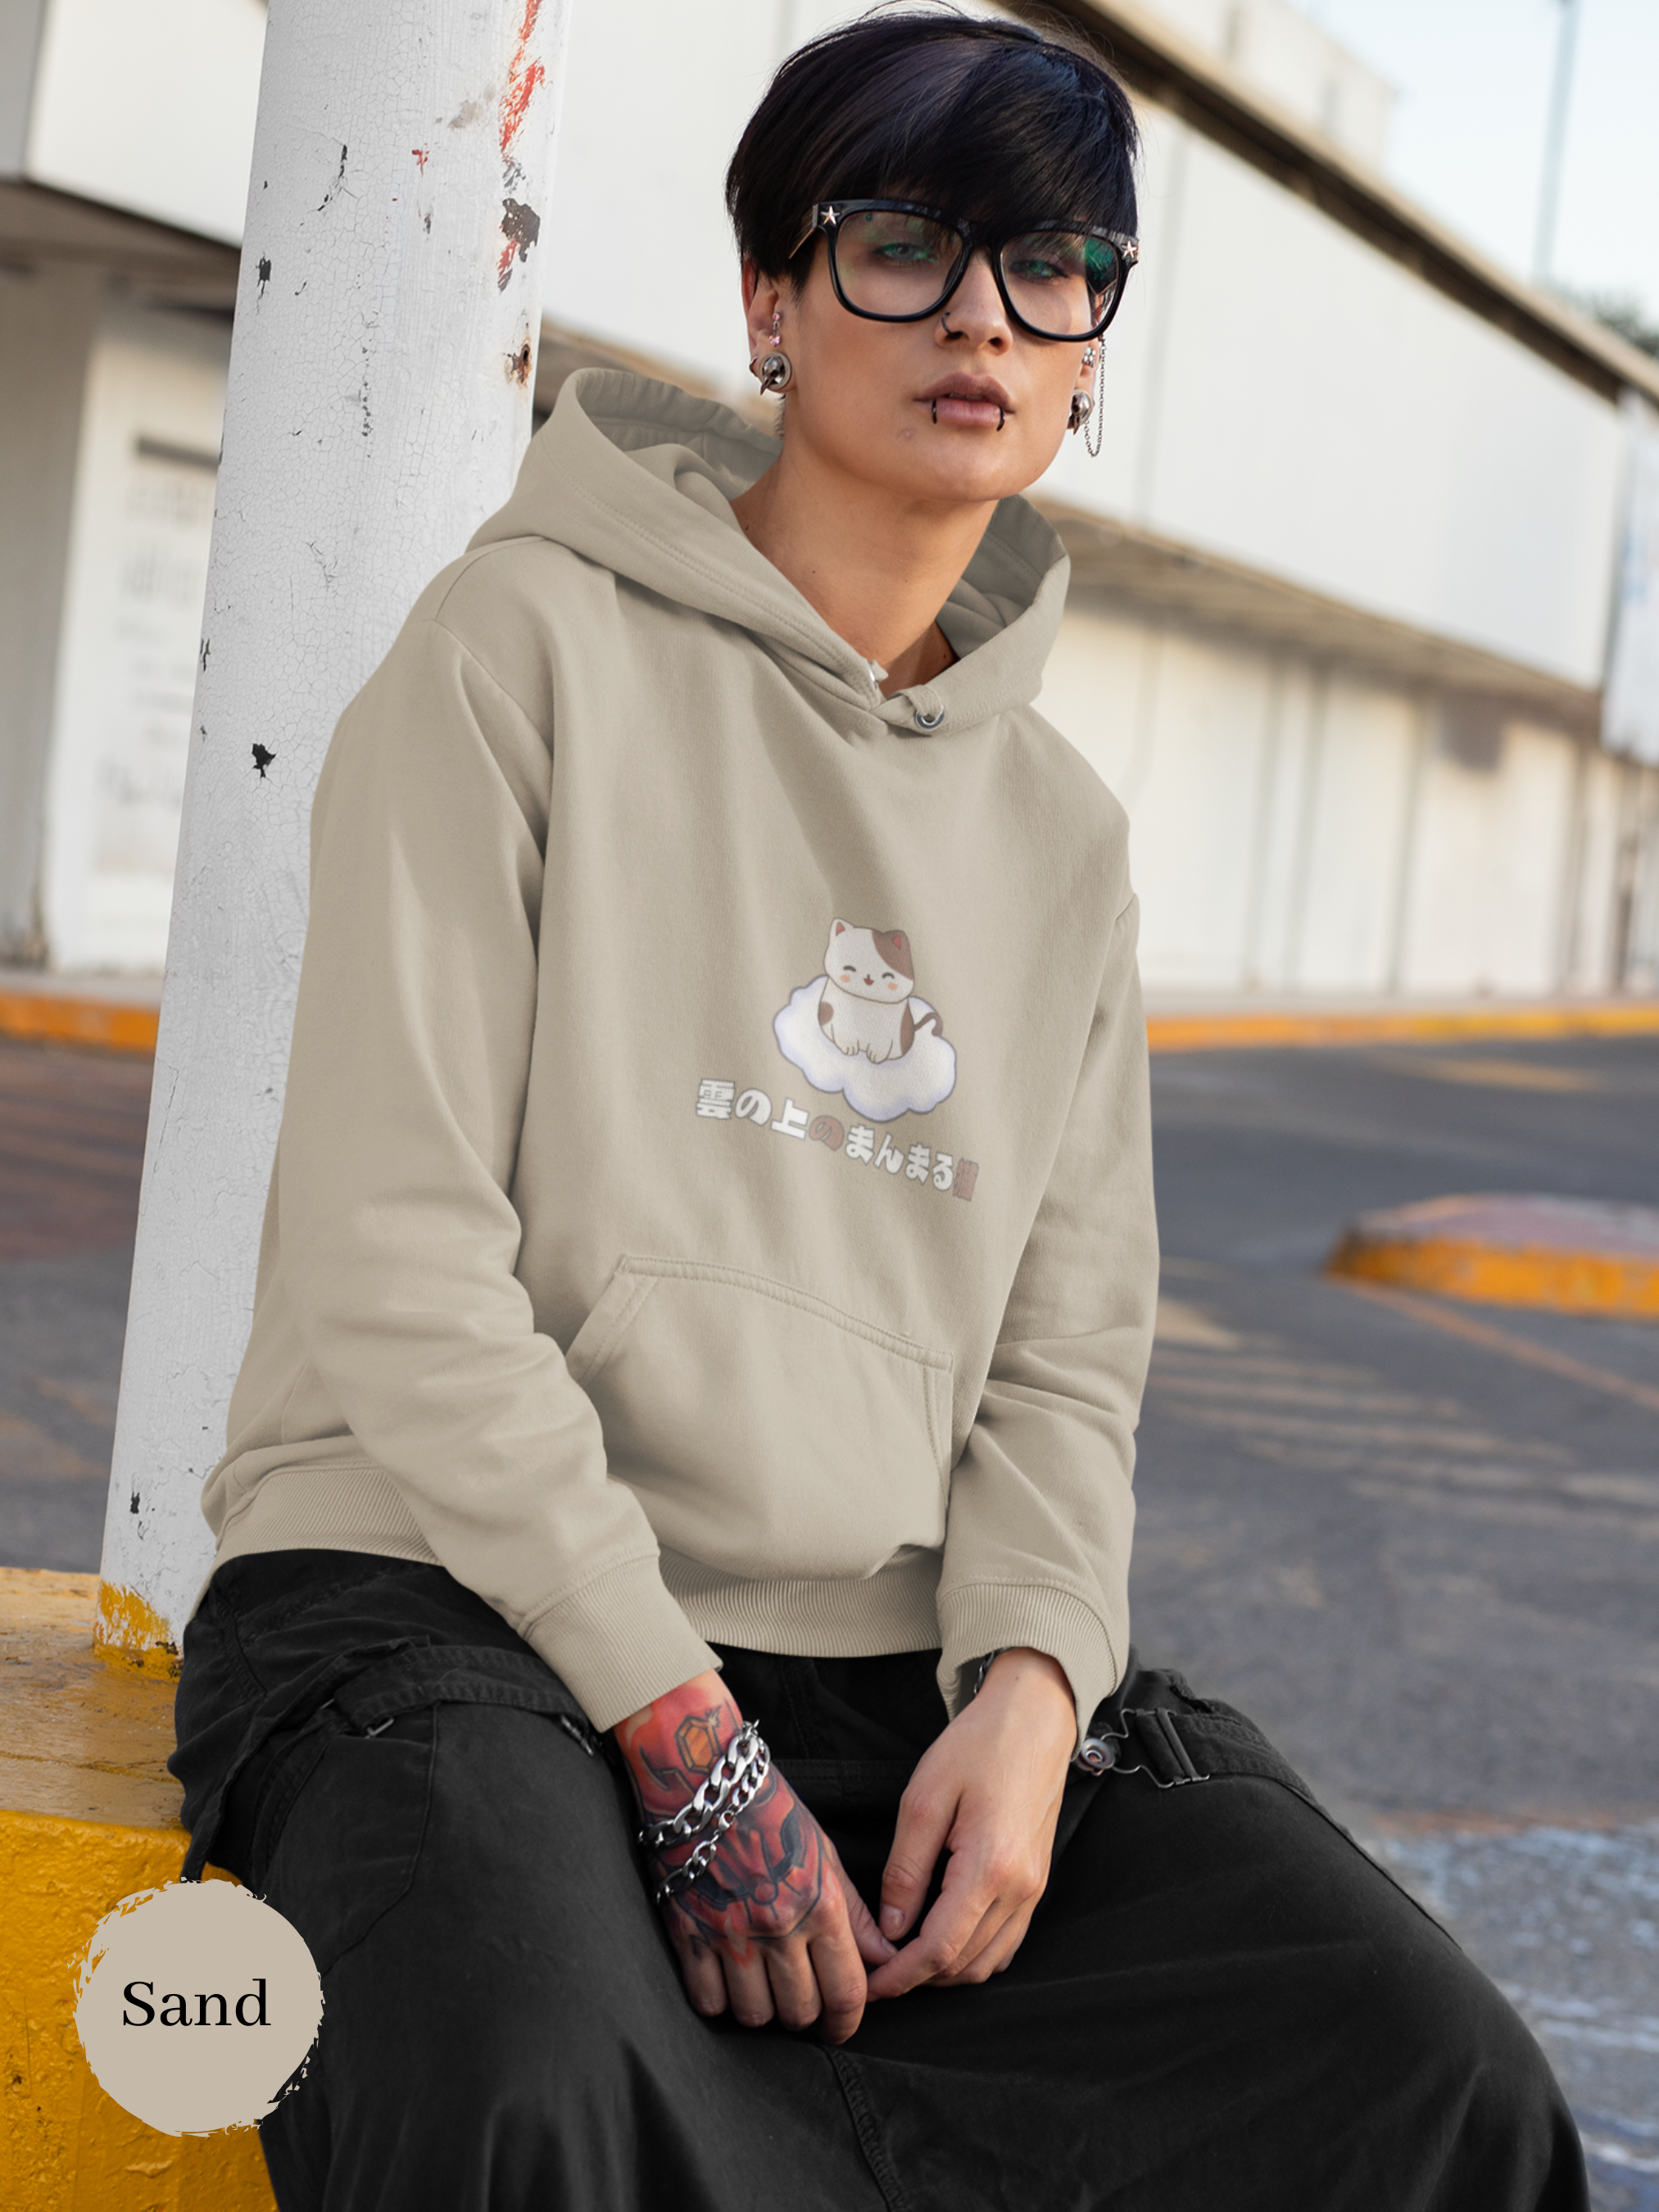 Cat Hoodie - Whimsical Cloud Kitty: A Chubby Cat on Clouds - Cat Hoodies, Cat Art, and Playful Puns - Unique Cat Lover Gift Idea